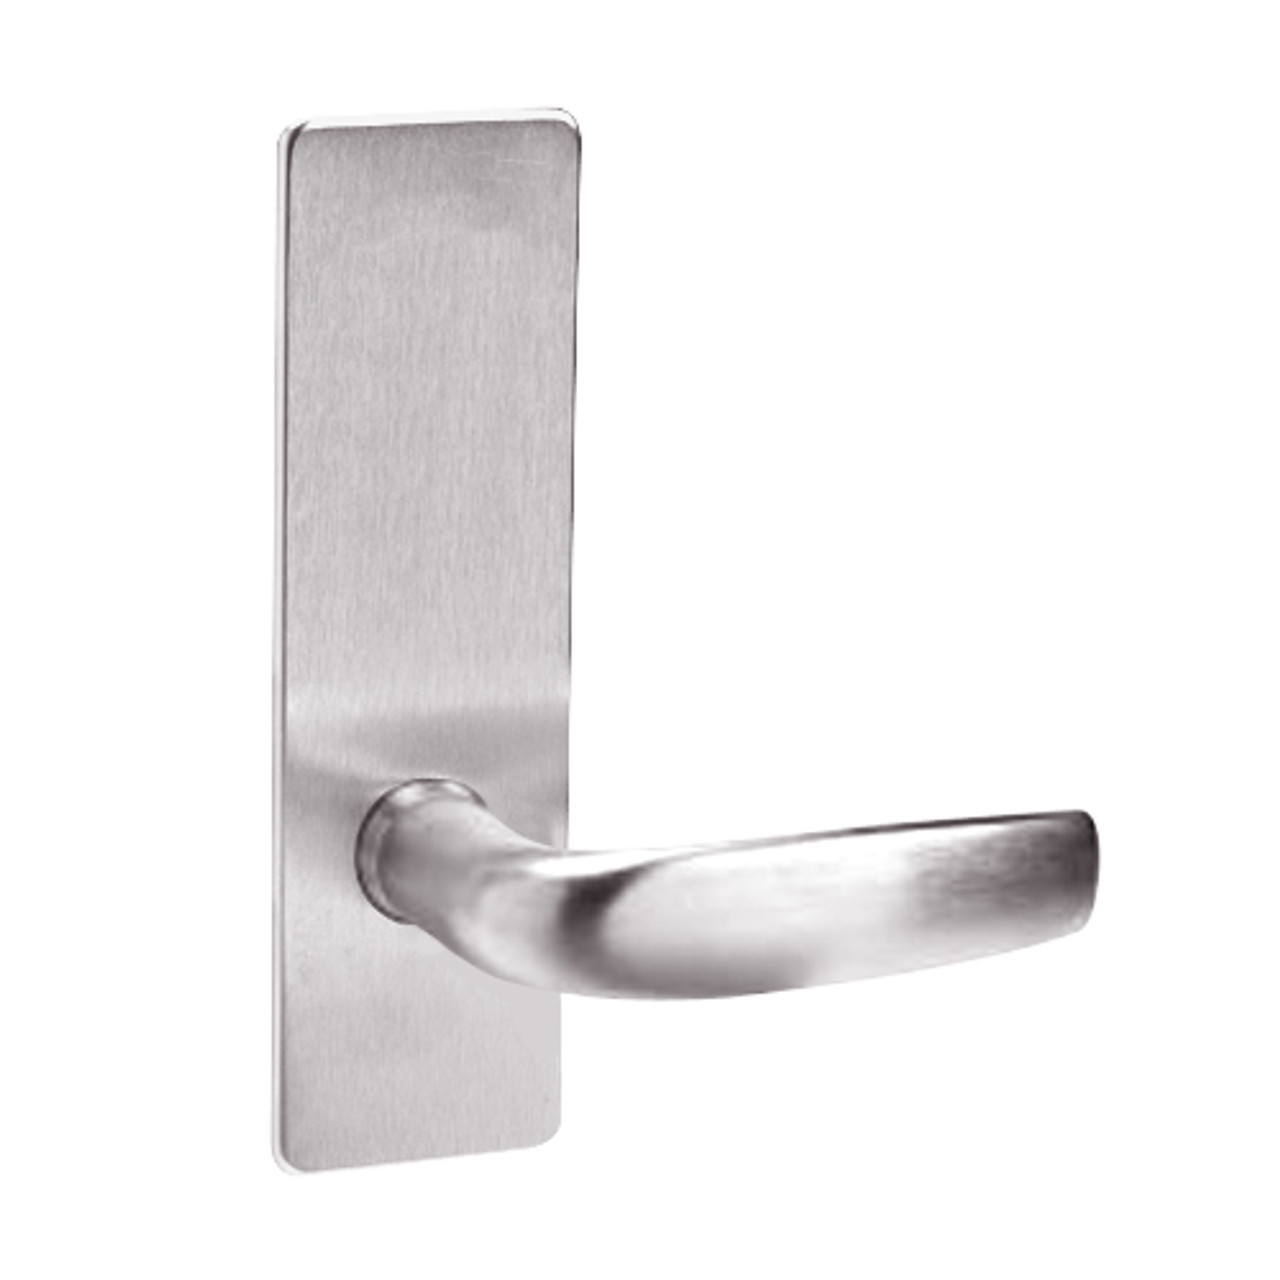 ML2060-CSR-629-M31 Corbin Russwin ML2000 Series Mortise Privacy Locksets with Citation Lever in Bright Stainless Steel